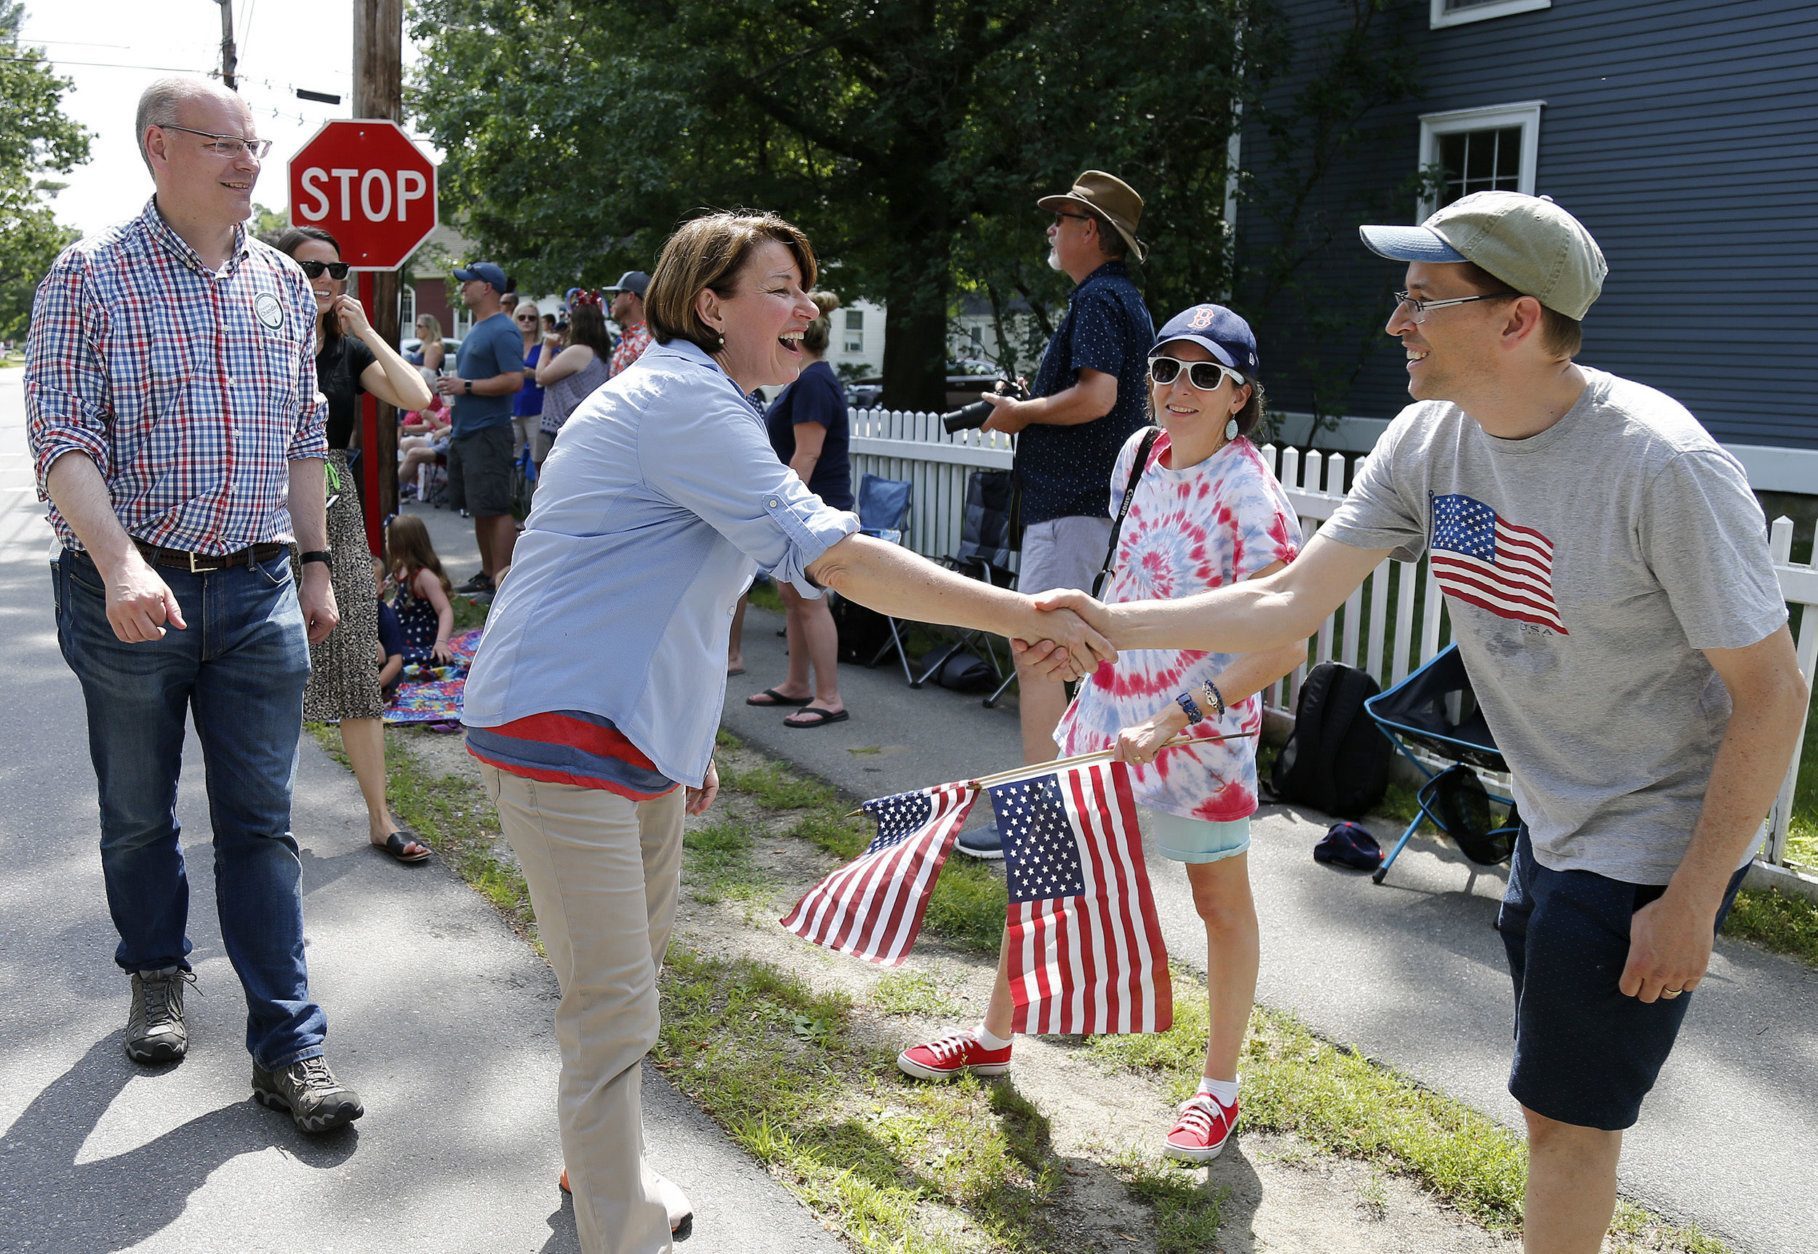 Democratic presidential candidate Sen. Amy Klobuchar, D-Minn., shakes hands with potential supporters along the route as her husband John Bessler looks on during the Fourth of July Parade, Thursday, July 4, 2019, in Amherst. (AP Photo/Mary Schwalm)